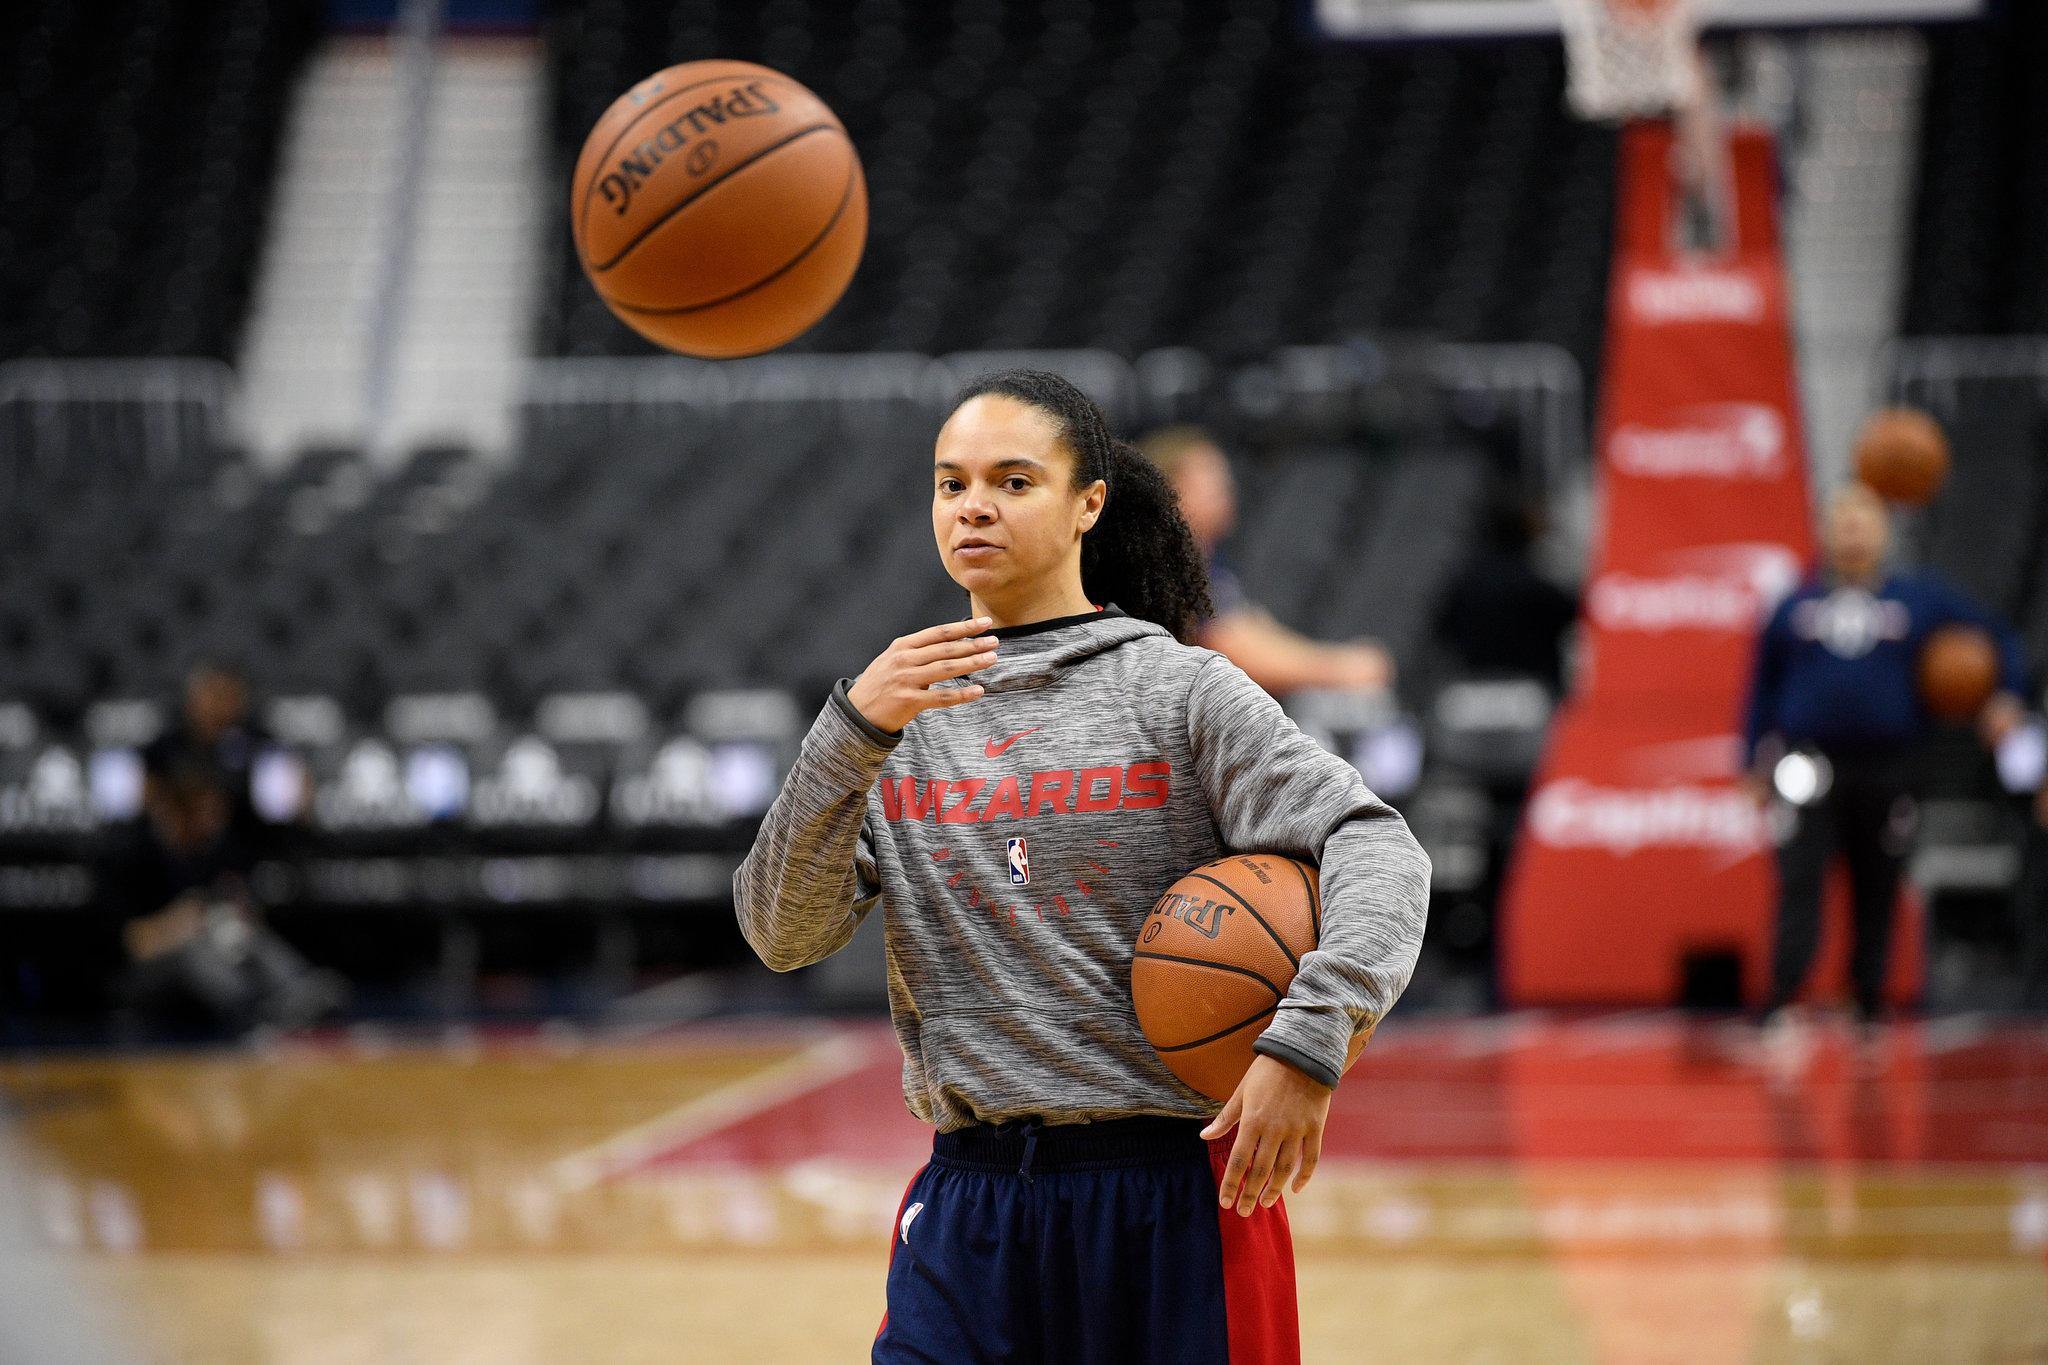 WNBA player Kristi Toliver as a member of the Wizards coaching staff